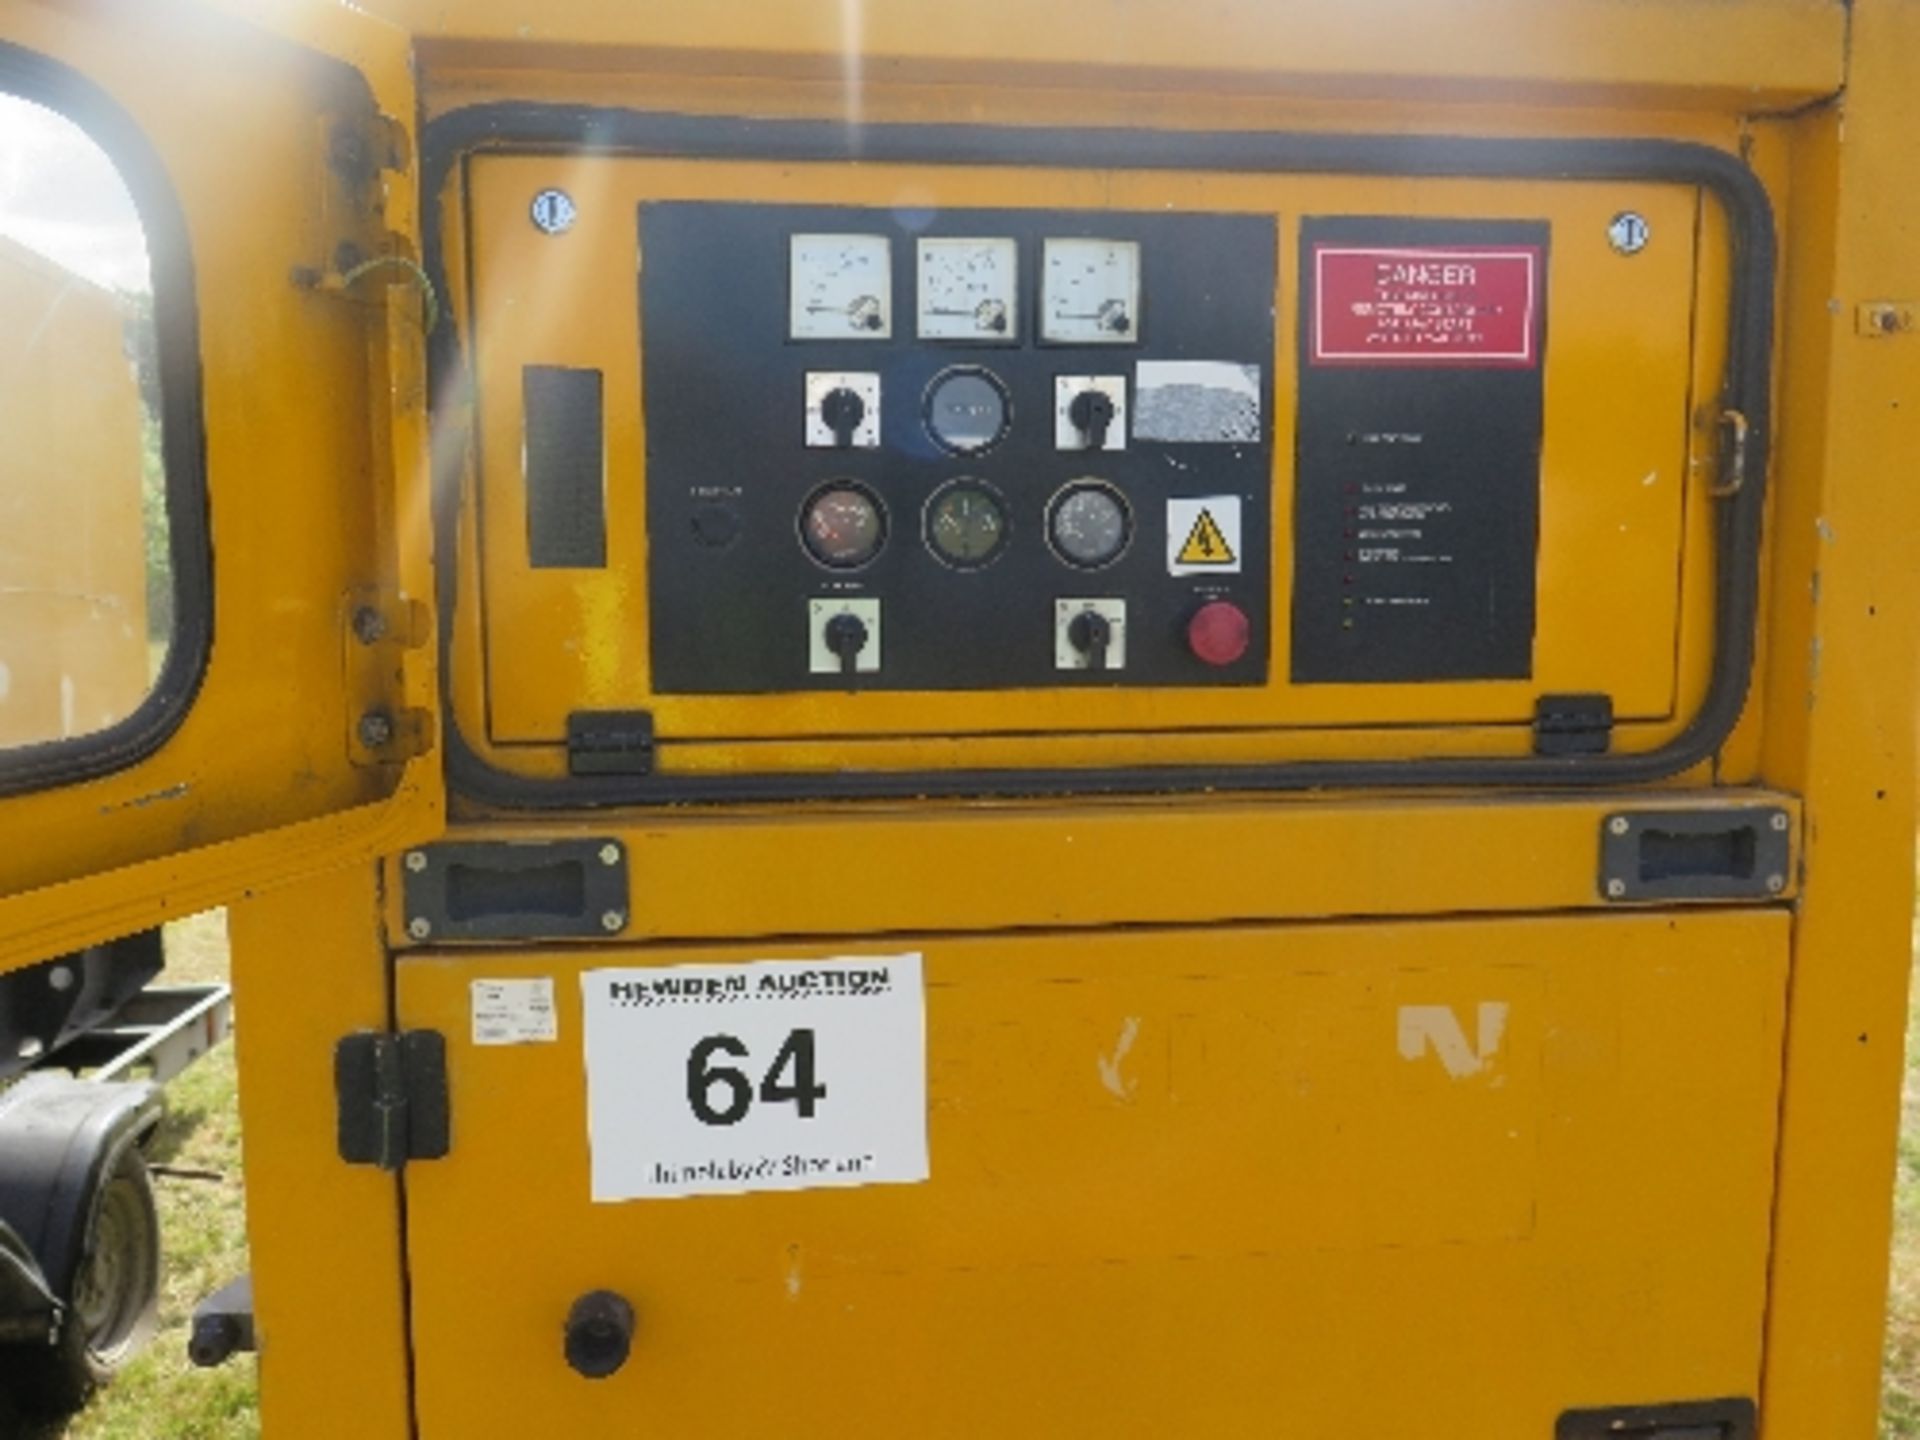 Caterpillar XQE100 generator 16850 hrs 138842
PERKINS POWER - RUNS AND MAKES POWER
ALL LOTS are - Image 2 of 6